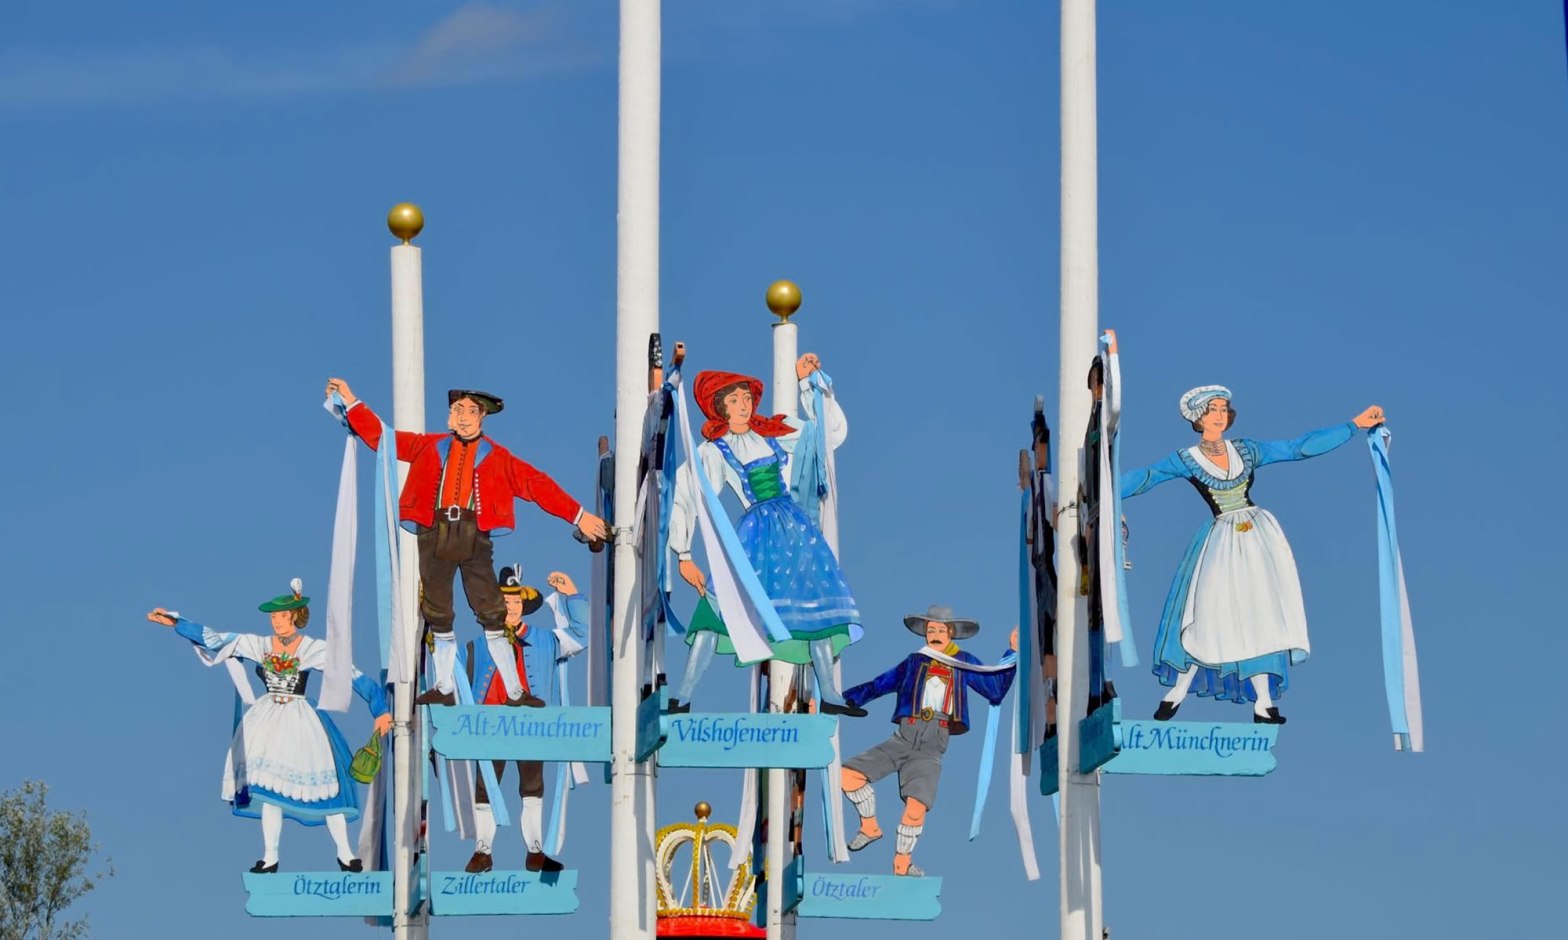 Decorations depicting men and women in traditional German costumes, at Oktoberfest celebrations in Munich, Germany.